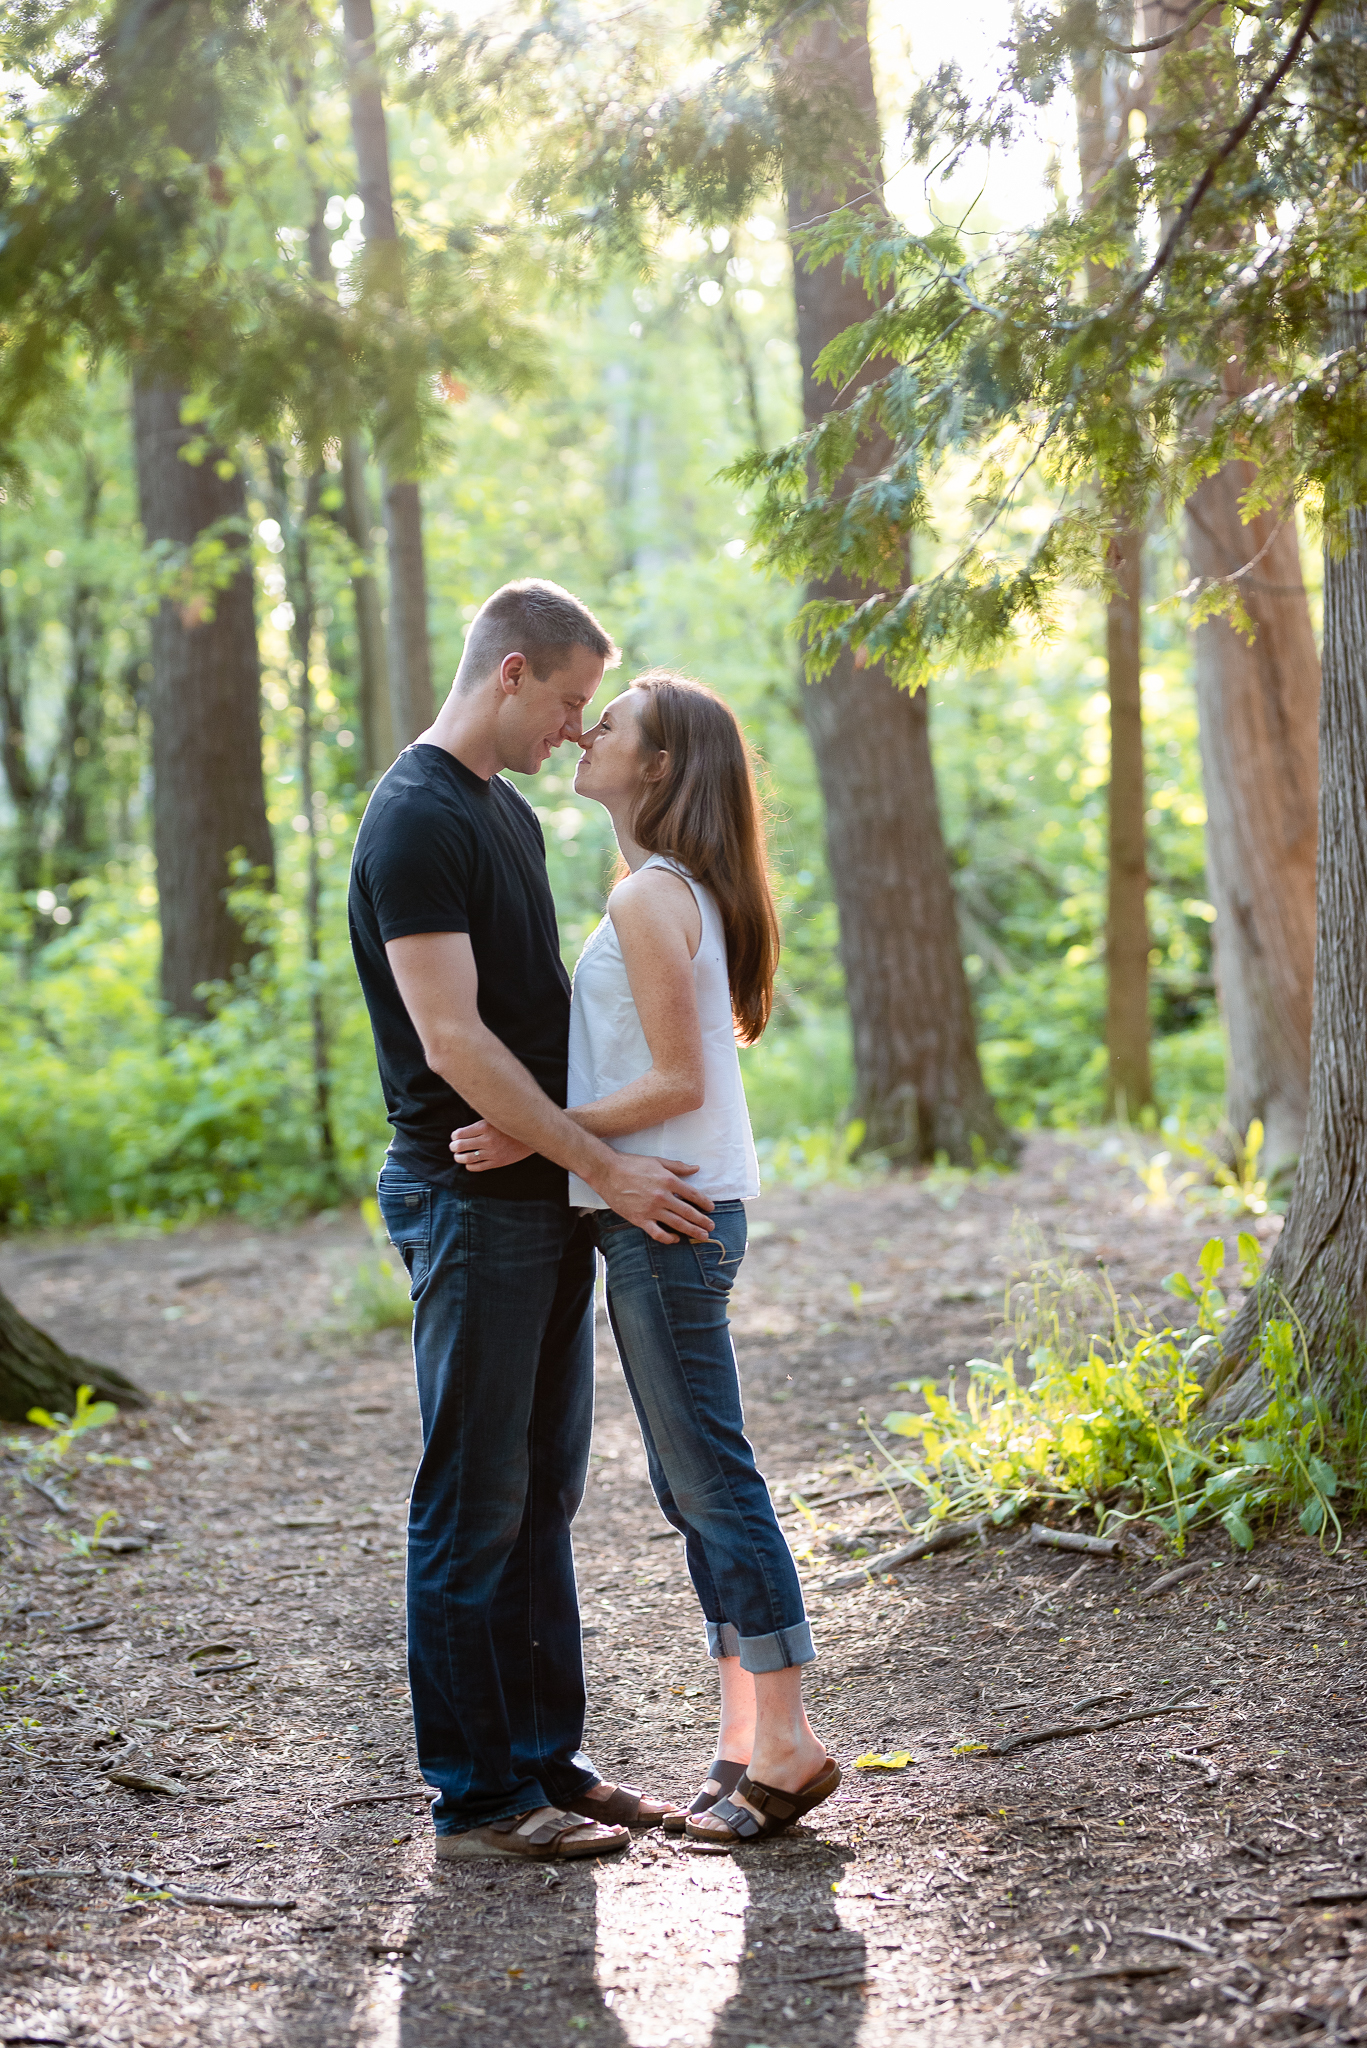 Couples60NaomiLuciennePhotography062019-5-Edit.jpg